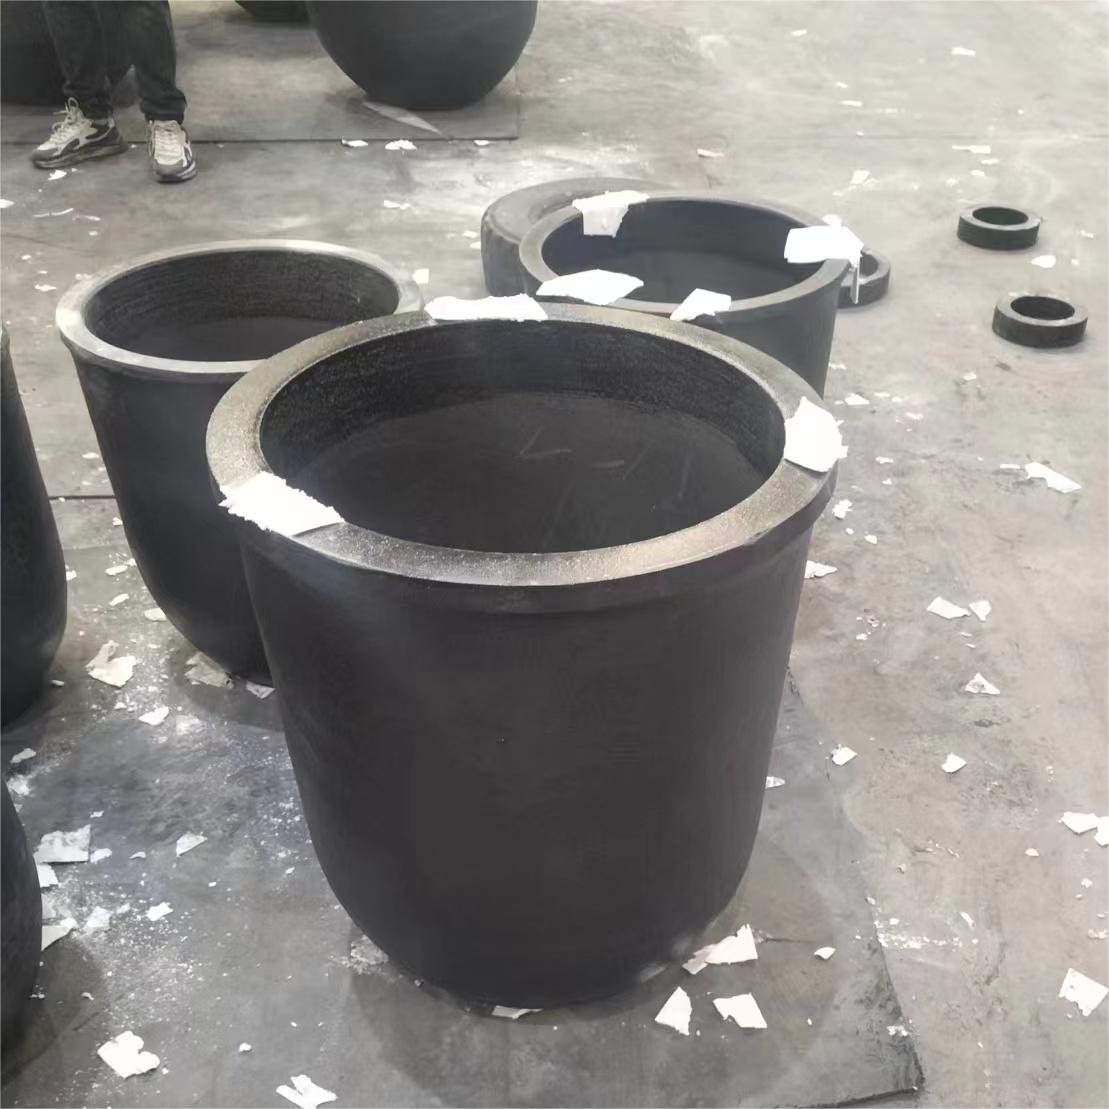 Silicon carbide crucible for high-temperature exploration is launched